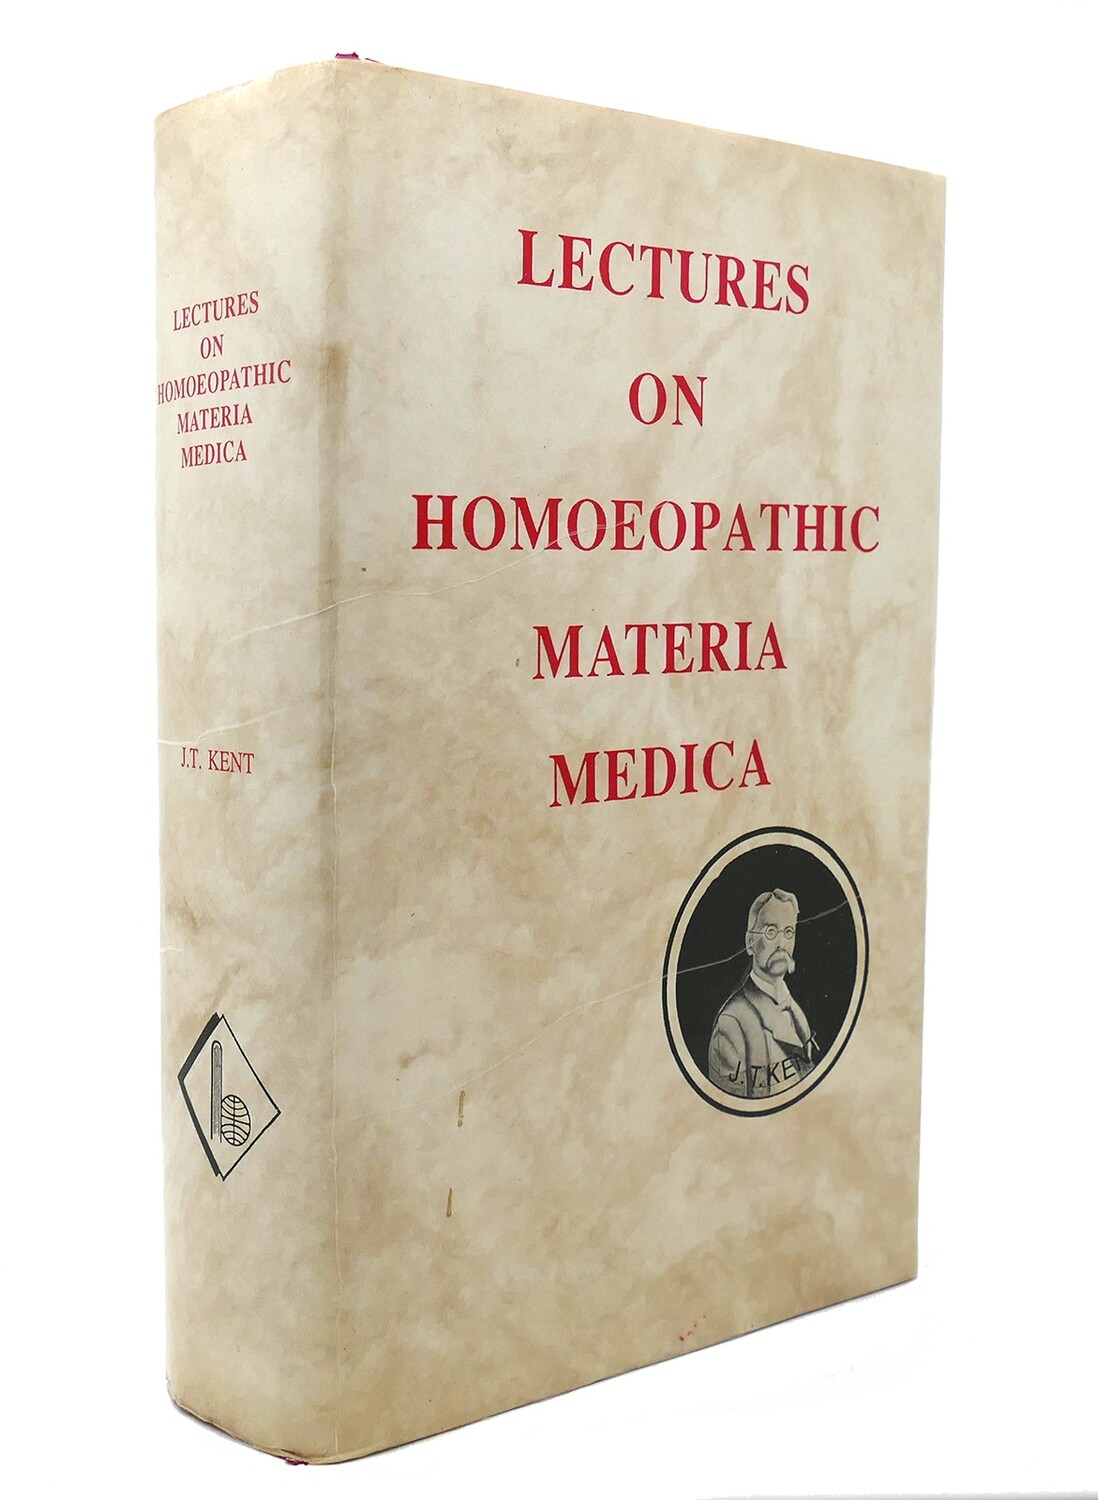 Lectures on Homoeopathic Materia Medica* (Kent)